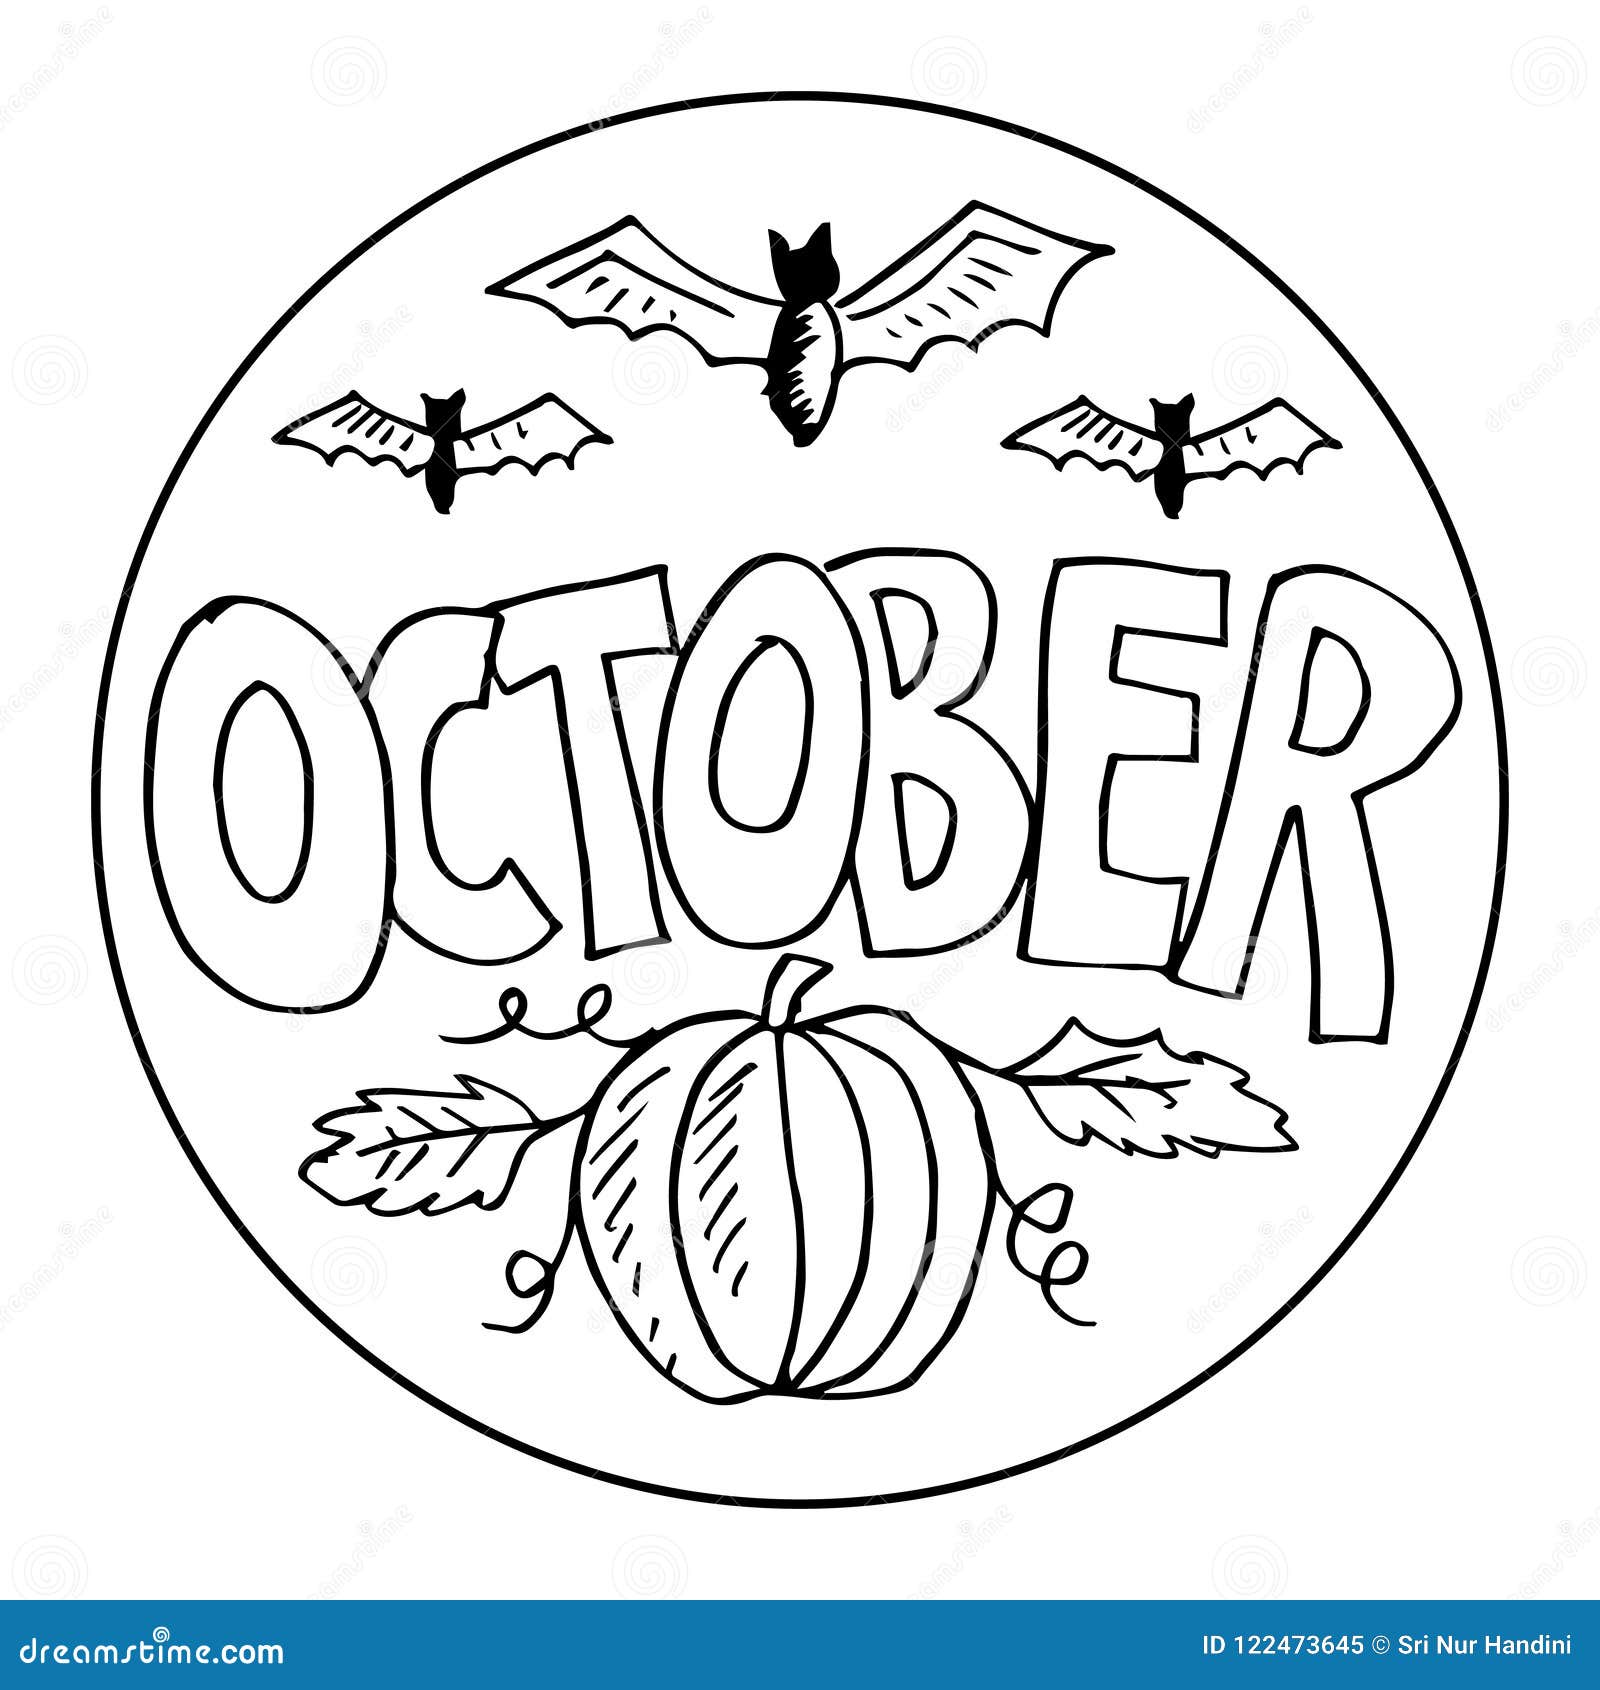 October Coloring Pages for Kids Stock Vector   Illustration of ...